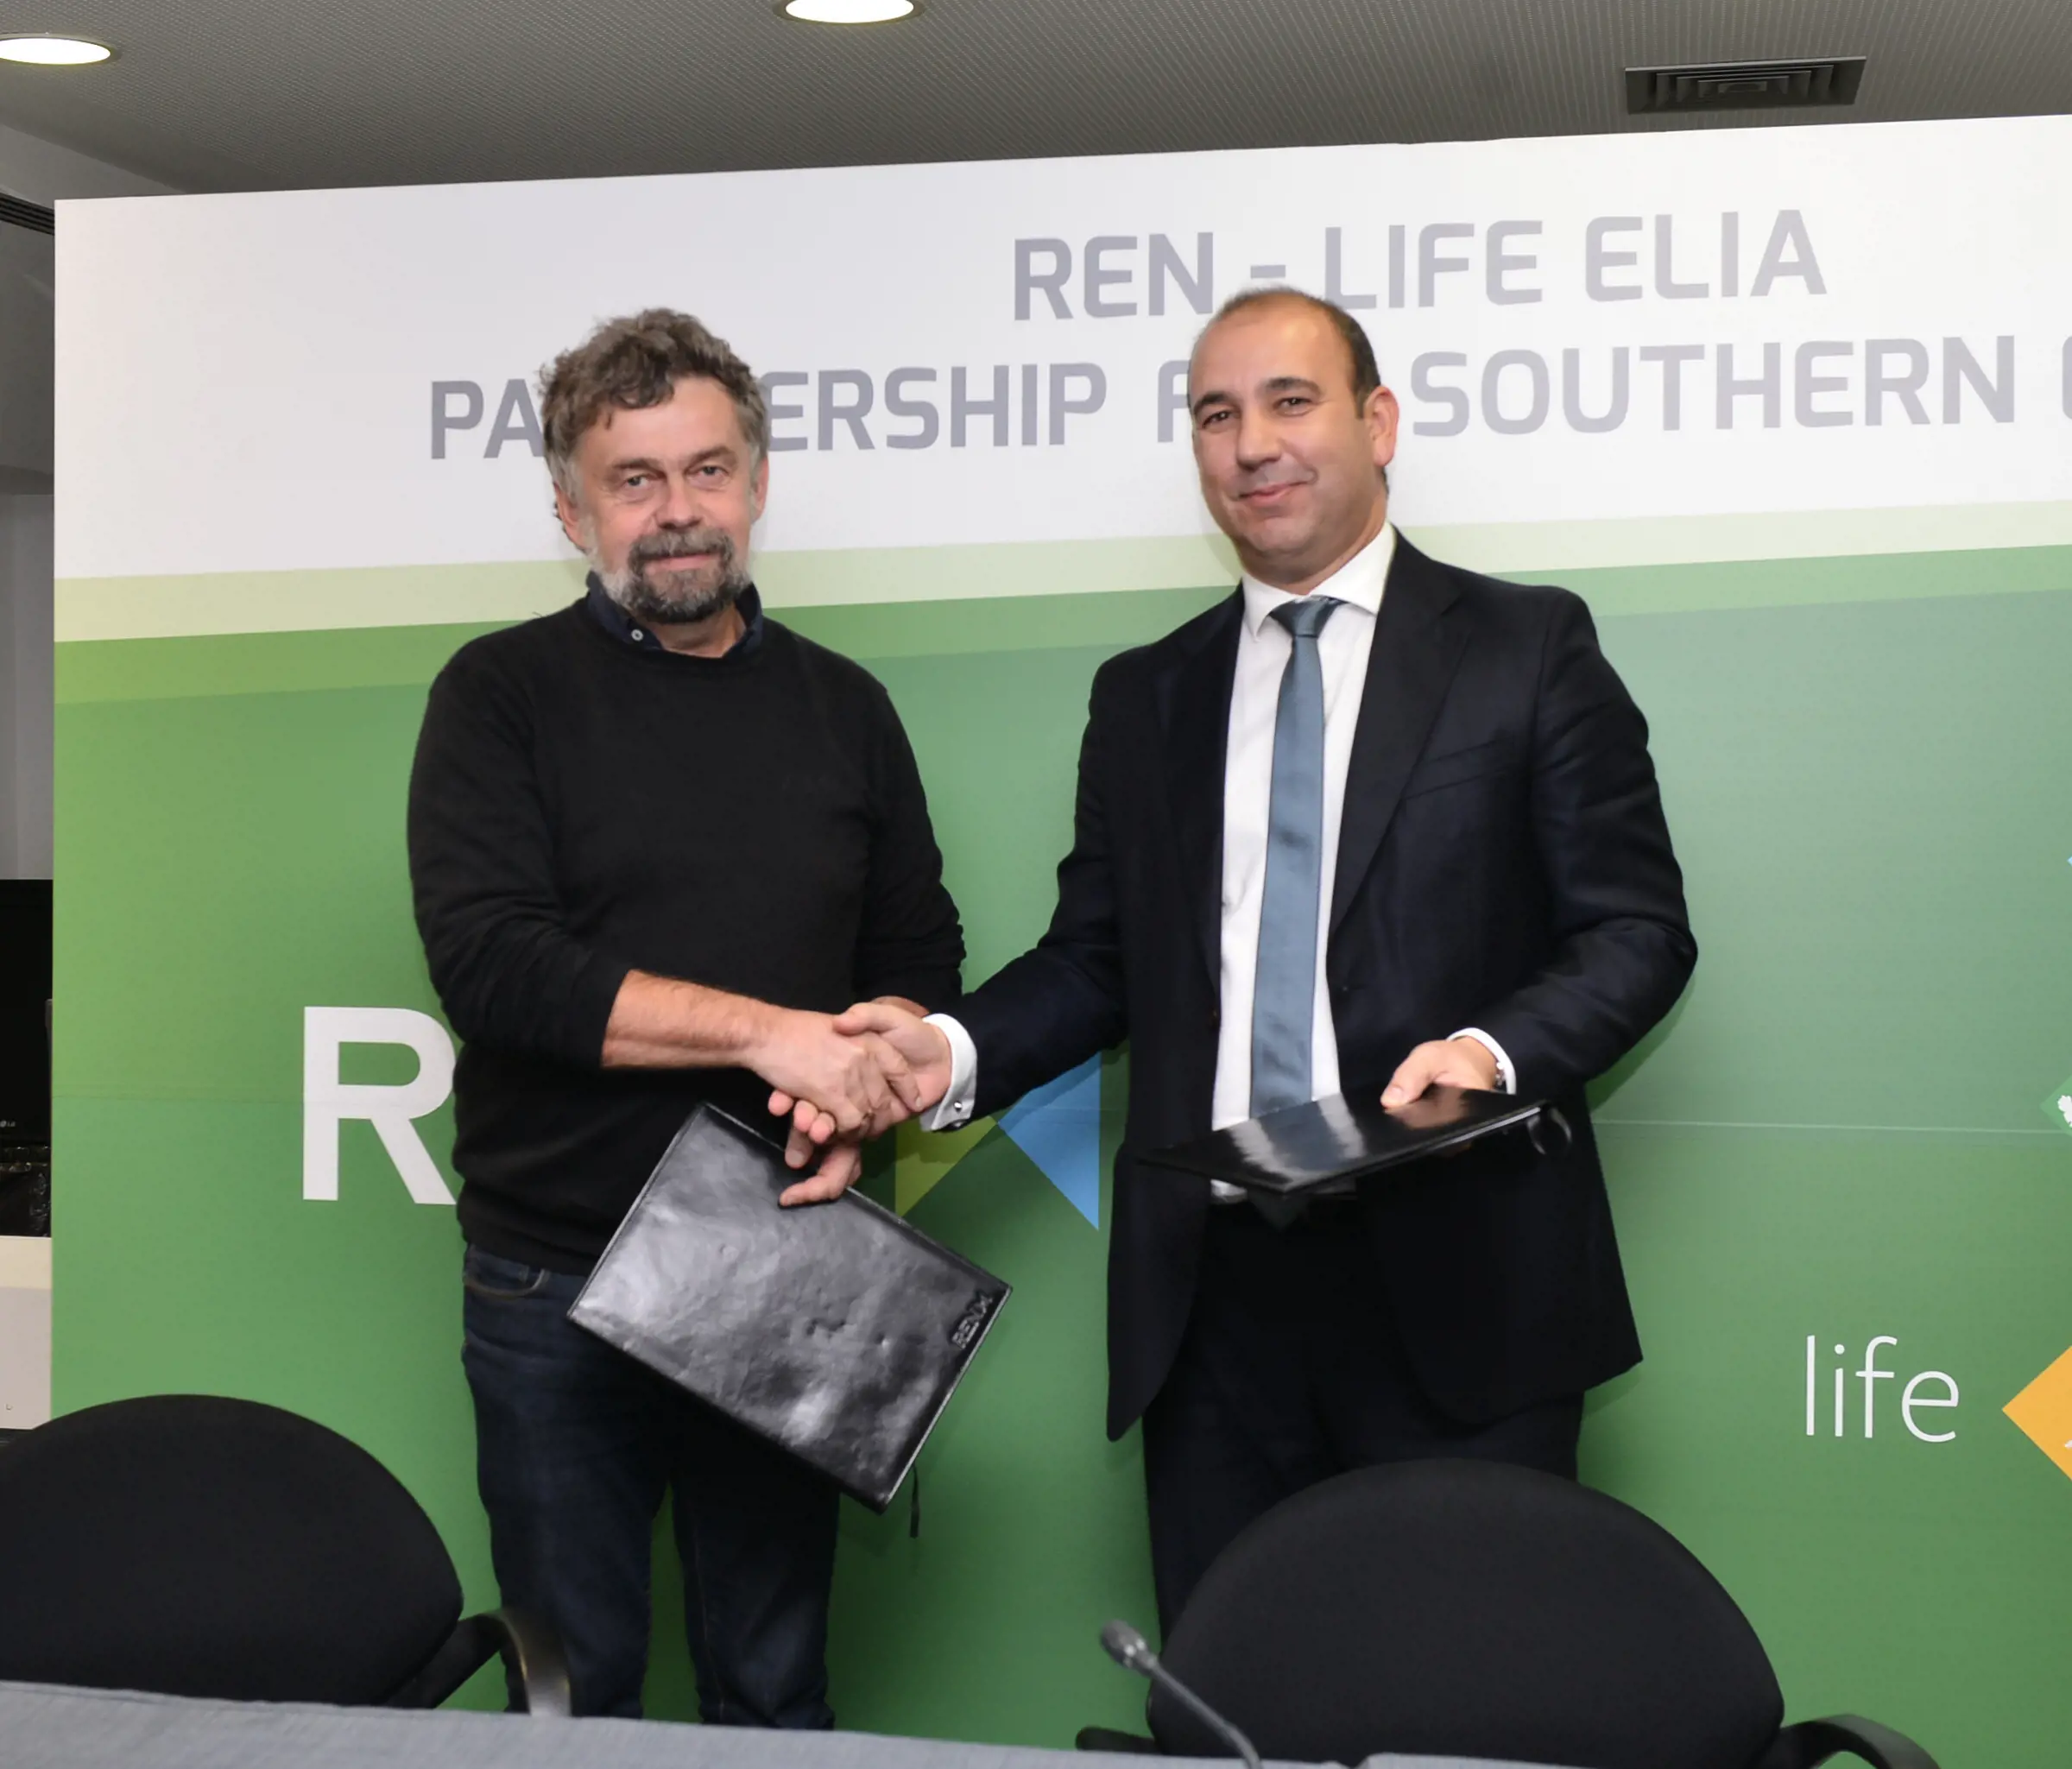 REN signs partnership agreement with LIFE Elia